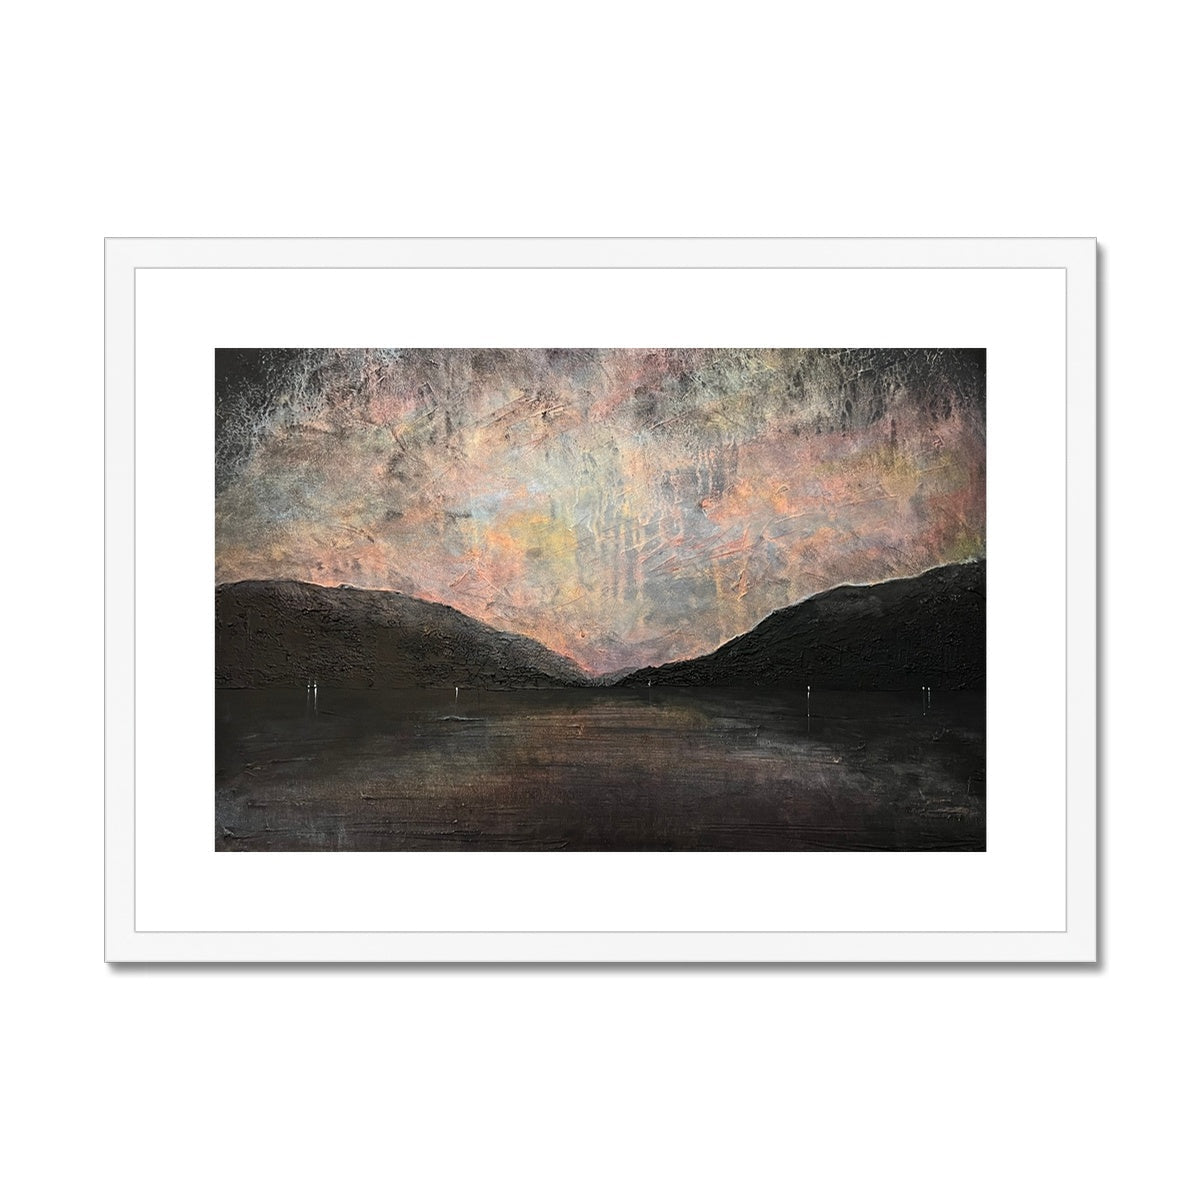 A Brooding Loch Lomond Painting | Framed & Mounted Prints From Scotland-Framed & Mounted Prints-Scottish Lochs & Mountains Art Gallery-A2 Landscape-White Frame-Paintings, Prints, Homeware, Art Gifts From Scotland By Scottish Artist Kevin Hunter